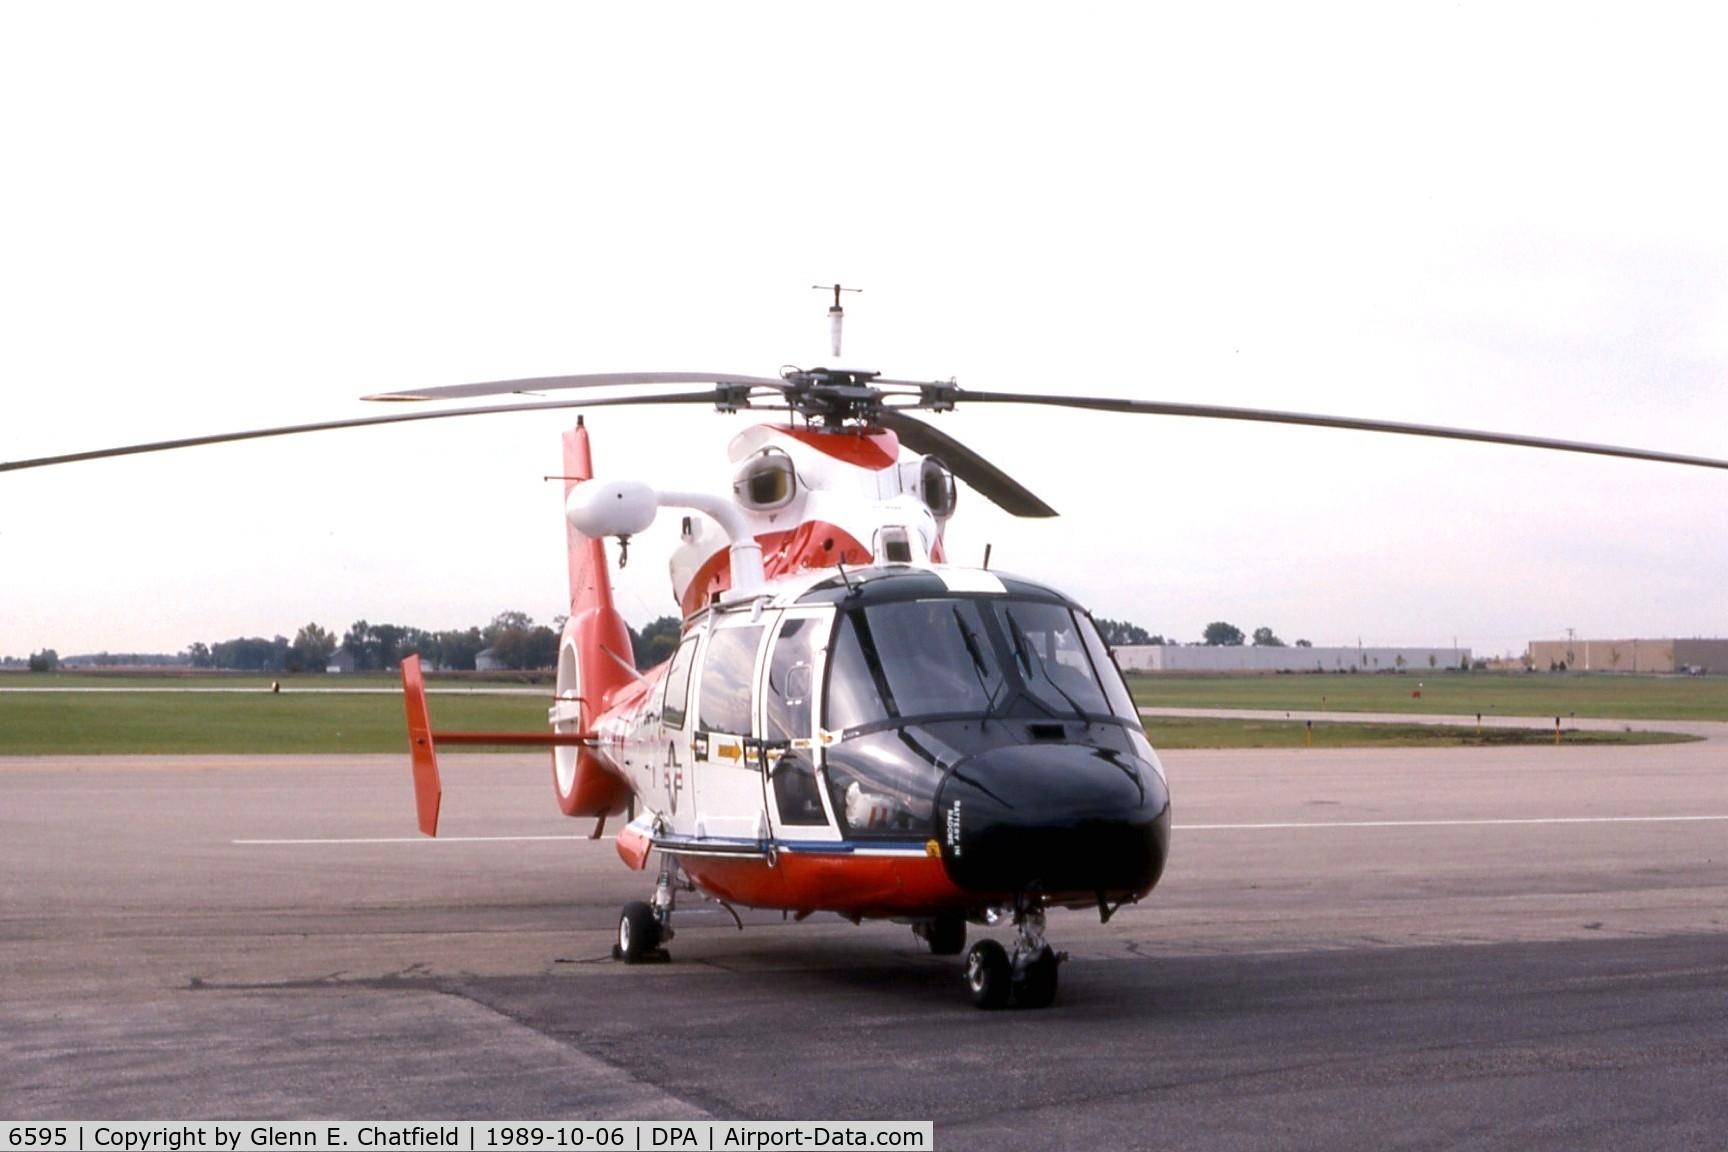 6595, 1989 Aerospatiale HH-65C Dolphin C/N 6297, HH-65A passing through.  Later upgraded to HH-65C